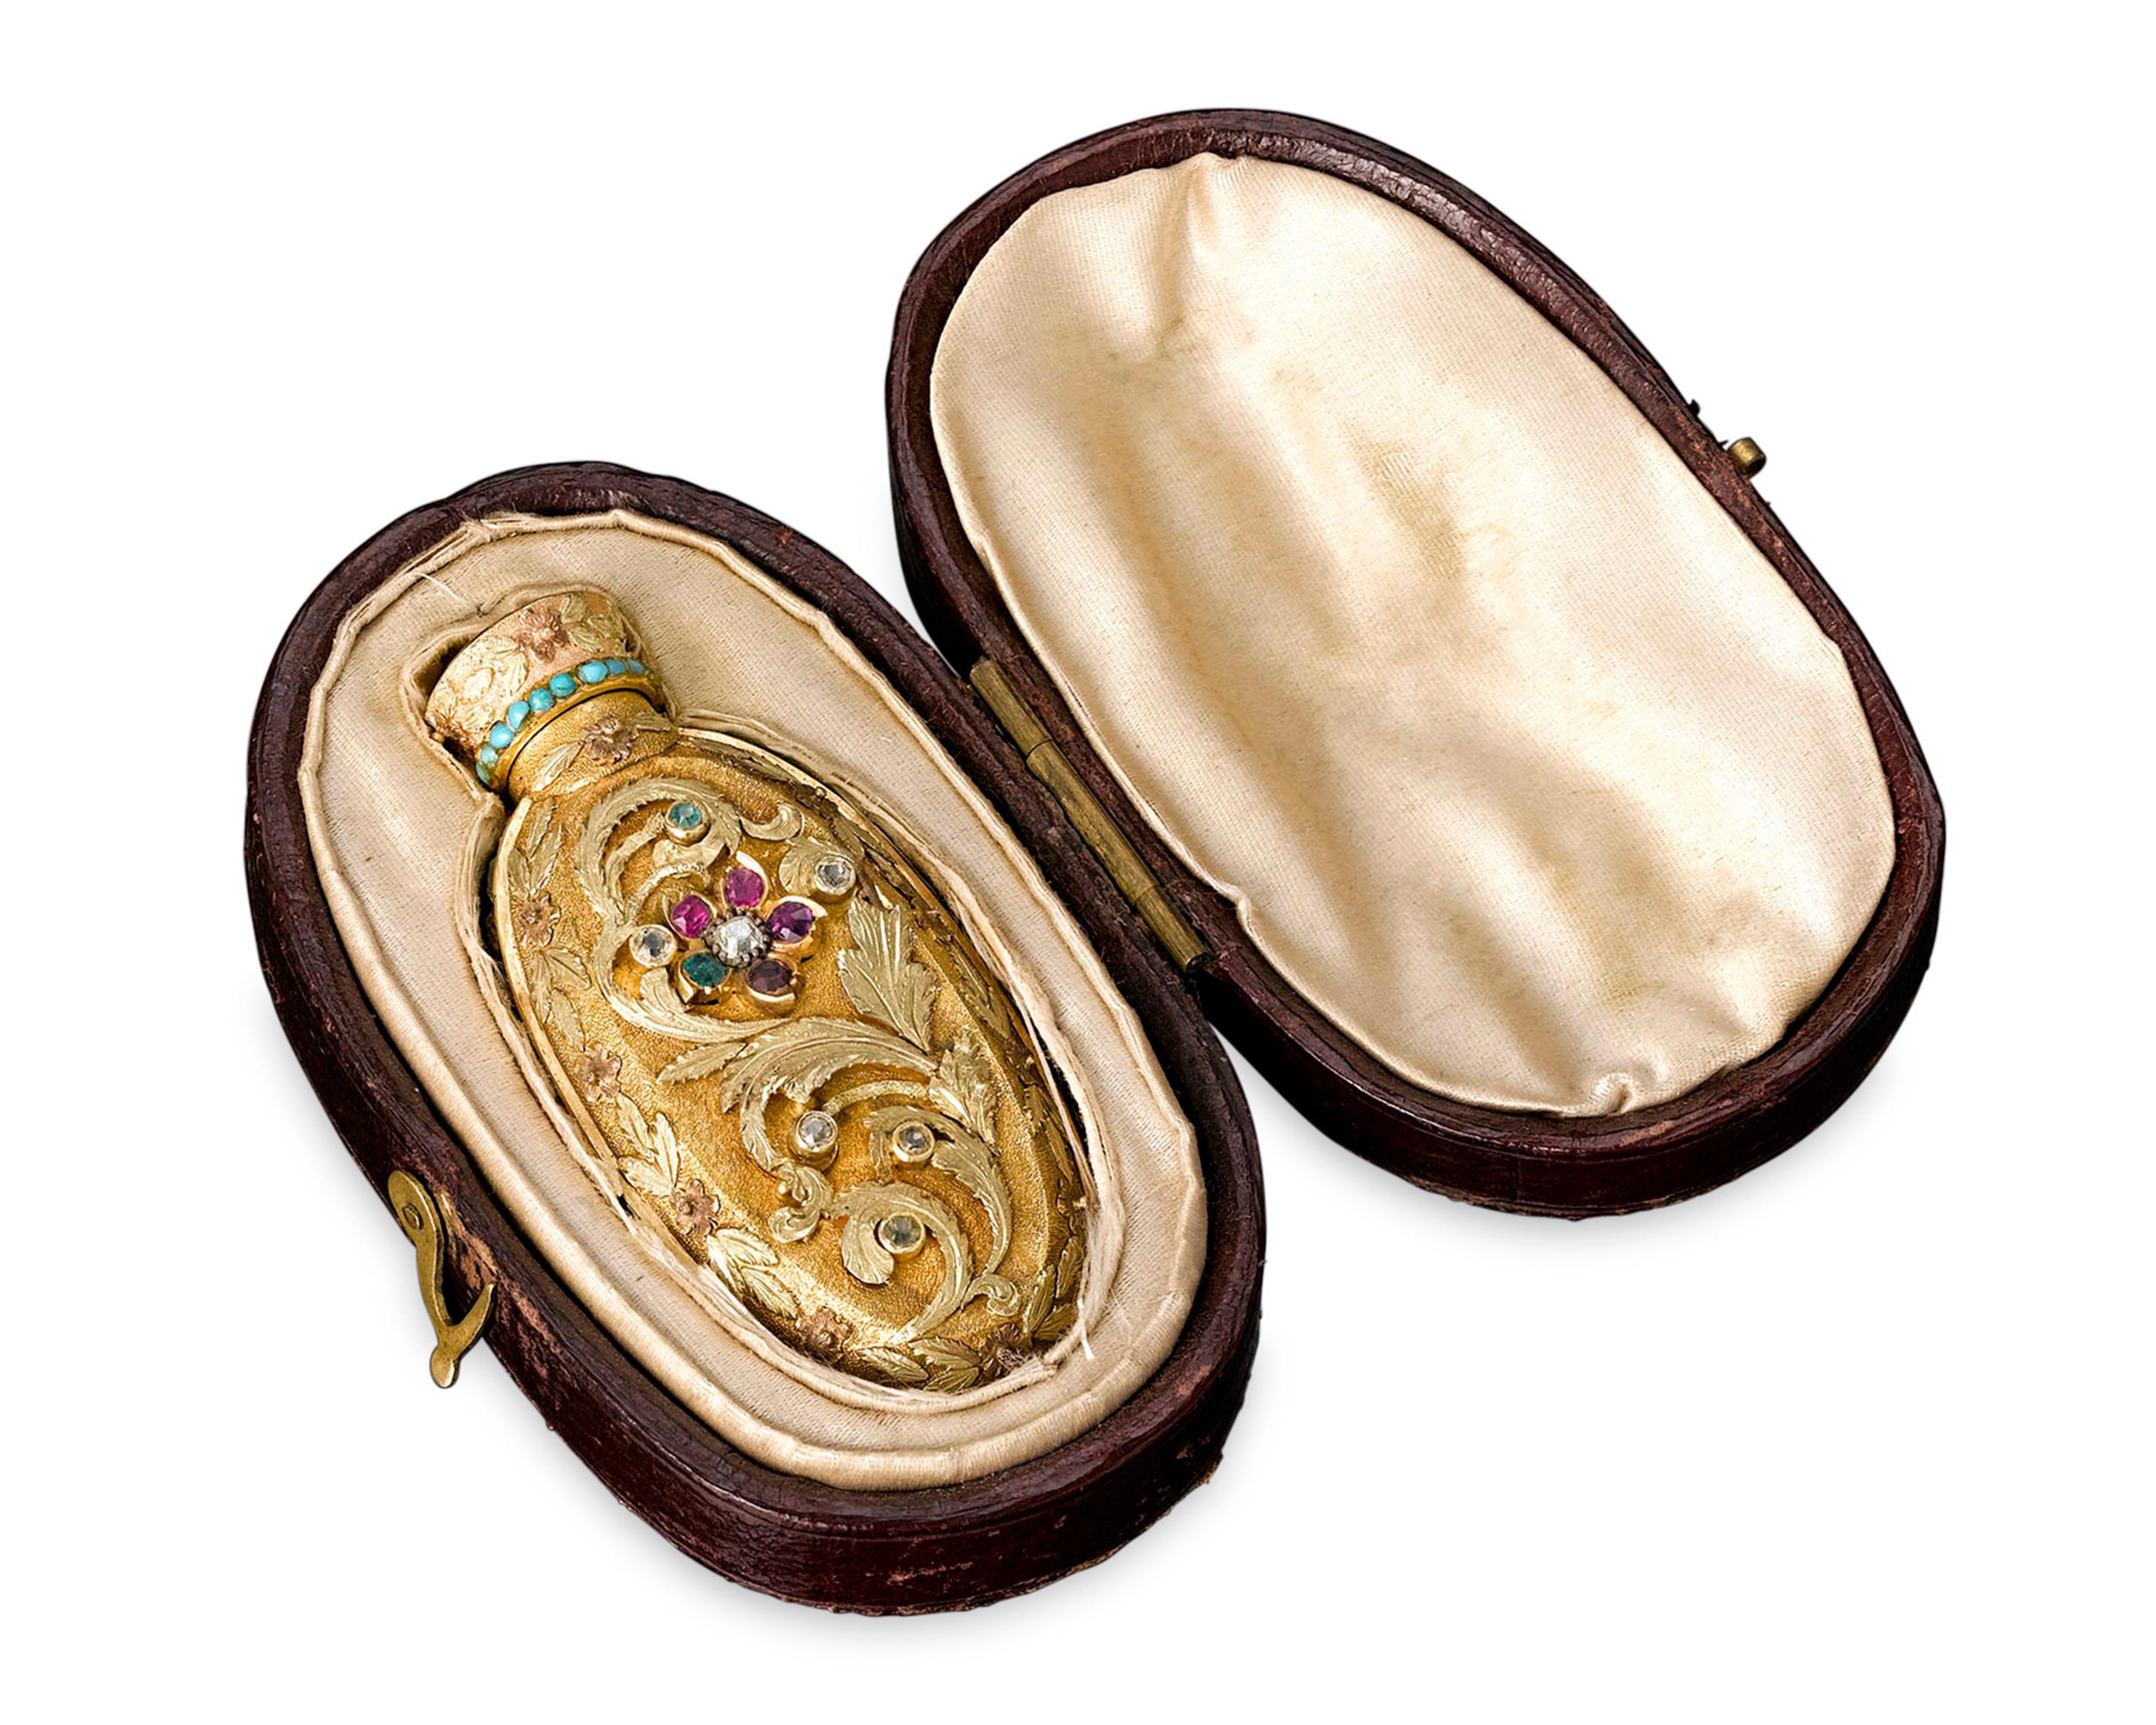 19th Century English Perfume and Snuff Bottle